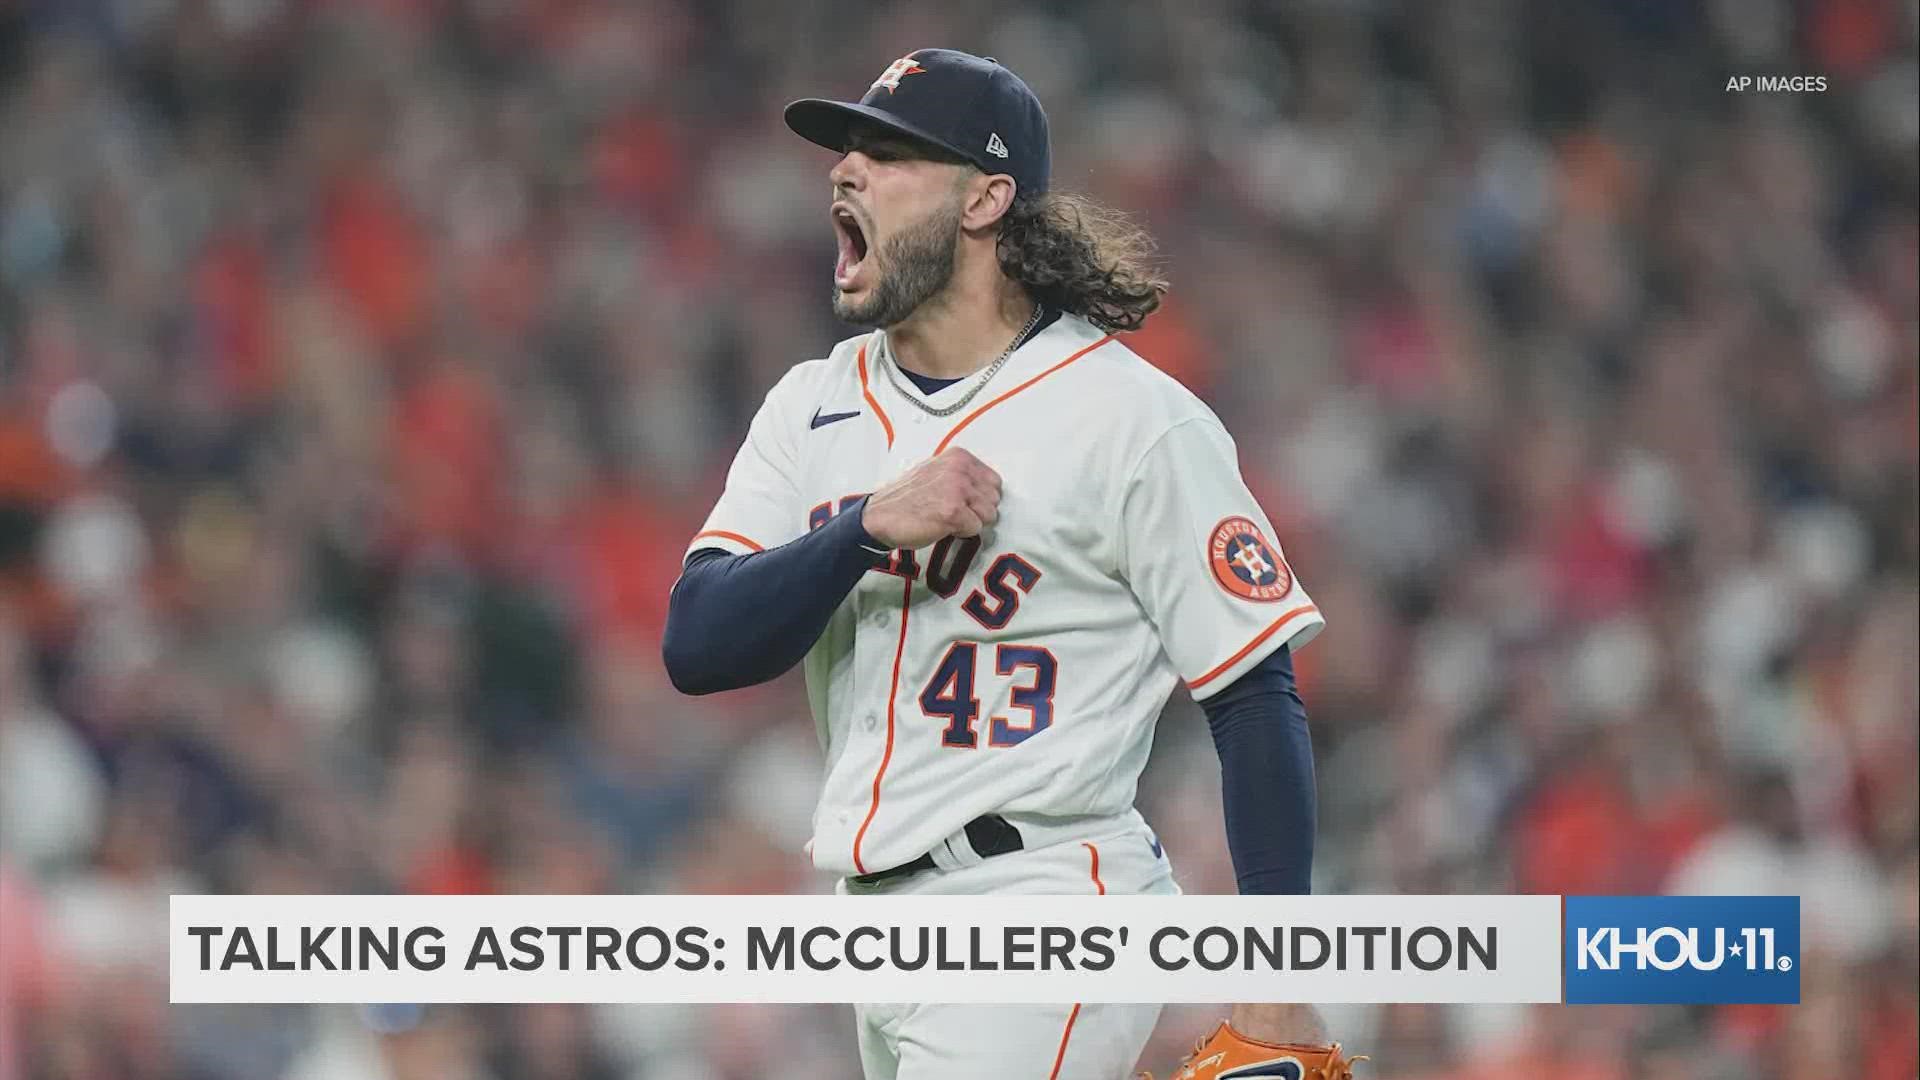 Digital anchor Brandi Smith talked to Jason Bristol about the injury to McCullers pending free agency for Correa.